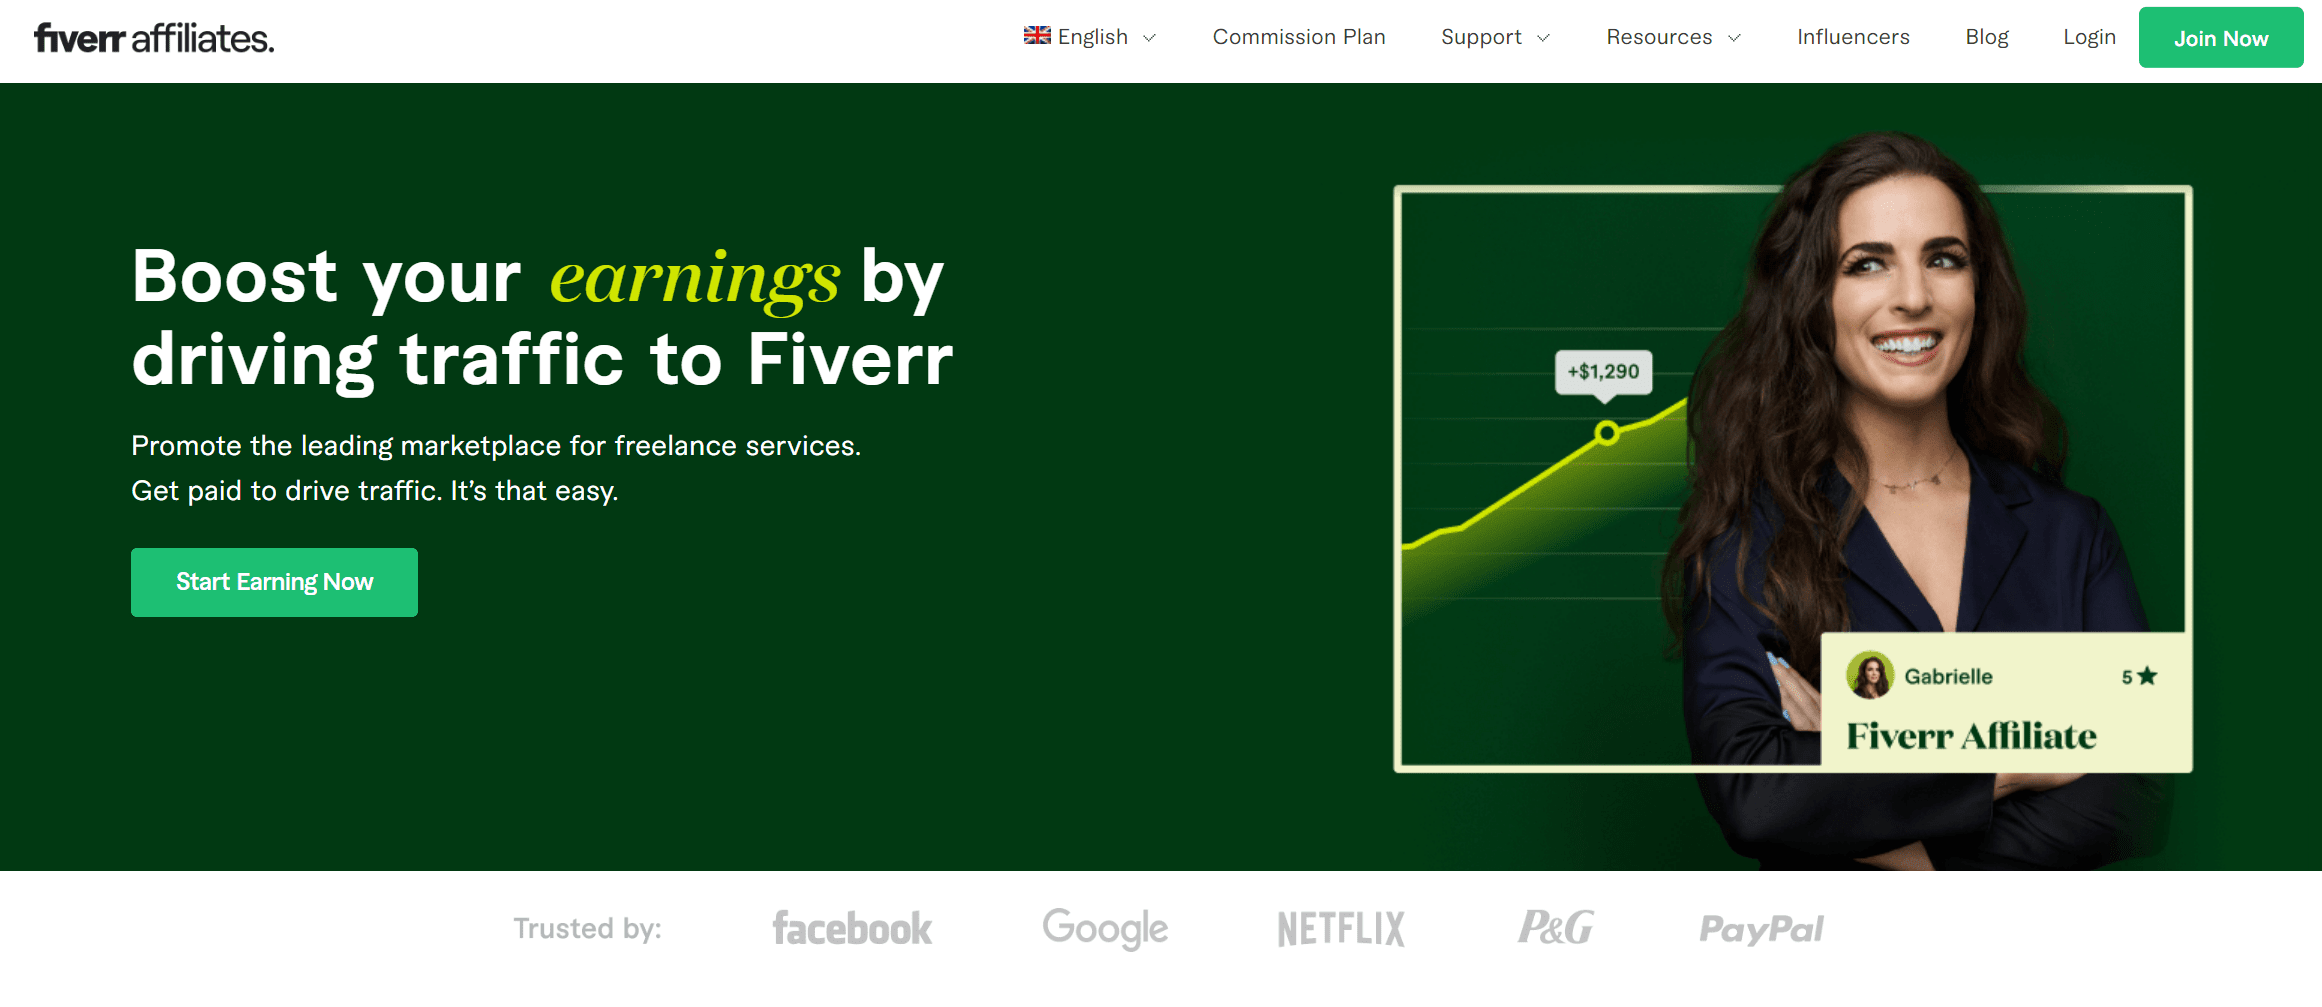 Fiverr 会员计划